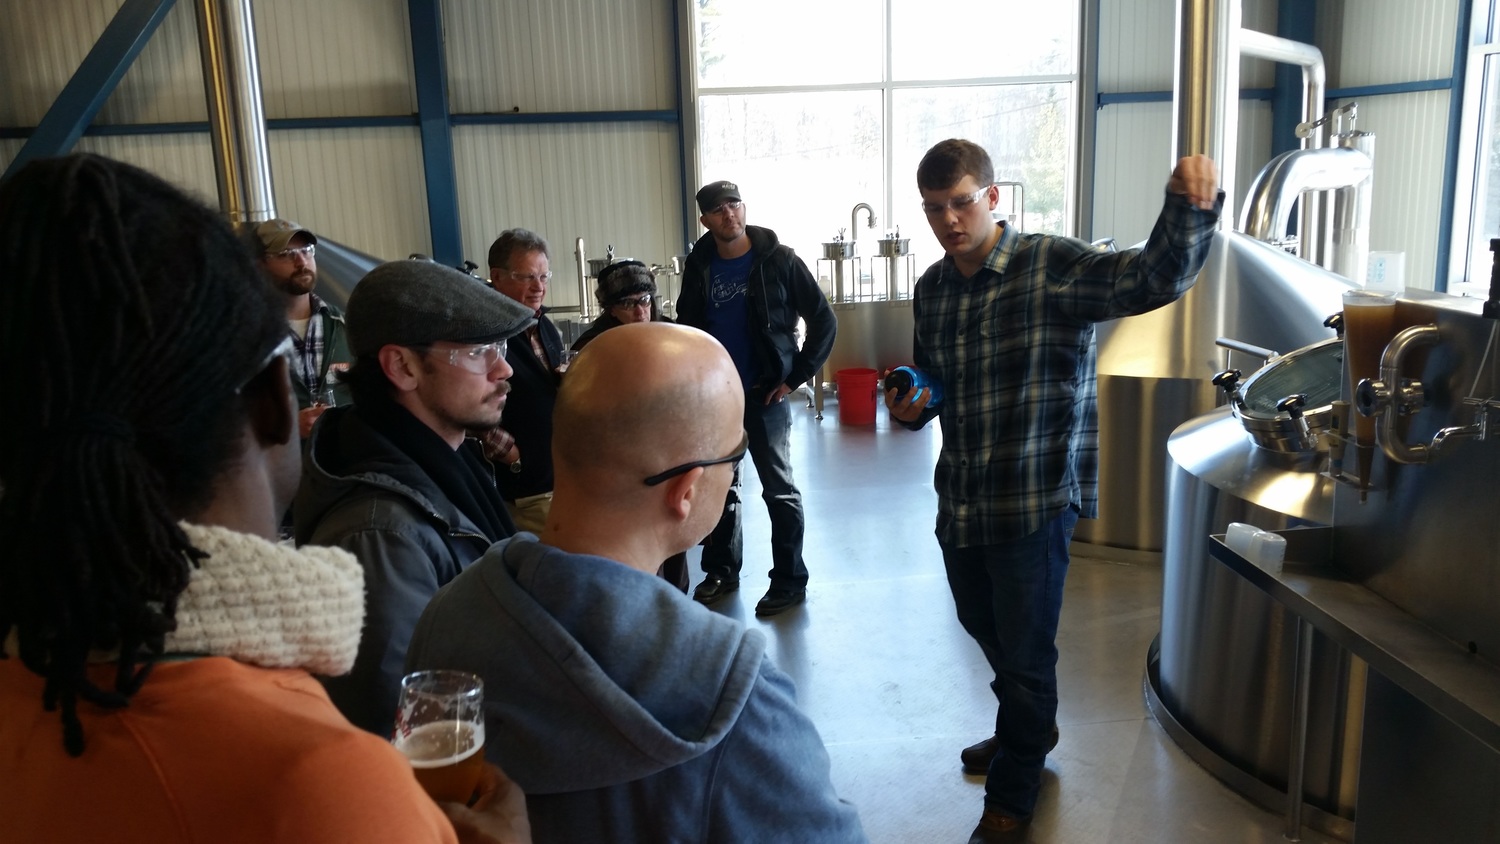  At Allagash Brewing Company, Adam took the group around on a very special VIP tour. Here is the brewhouse deck, seldom seen by outsiders during brewing operations.&nbsp; 